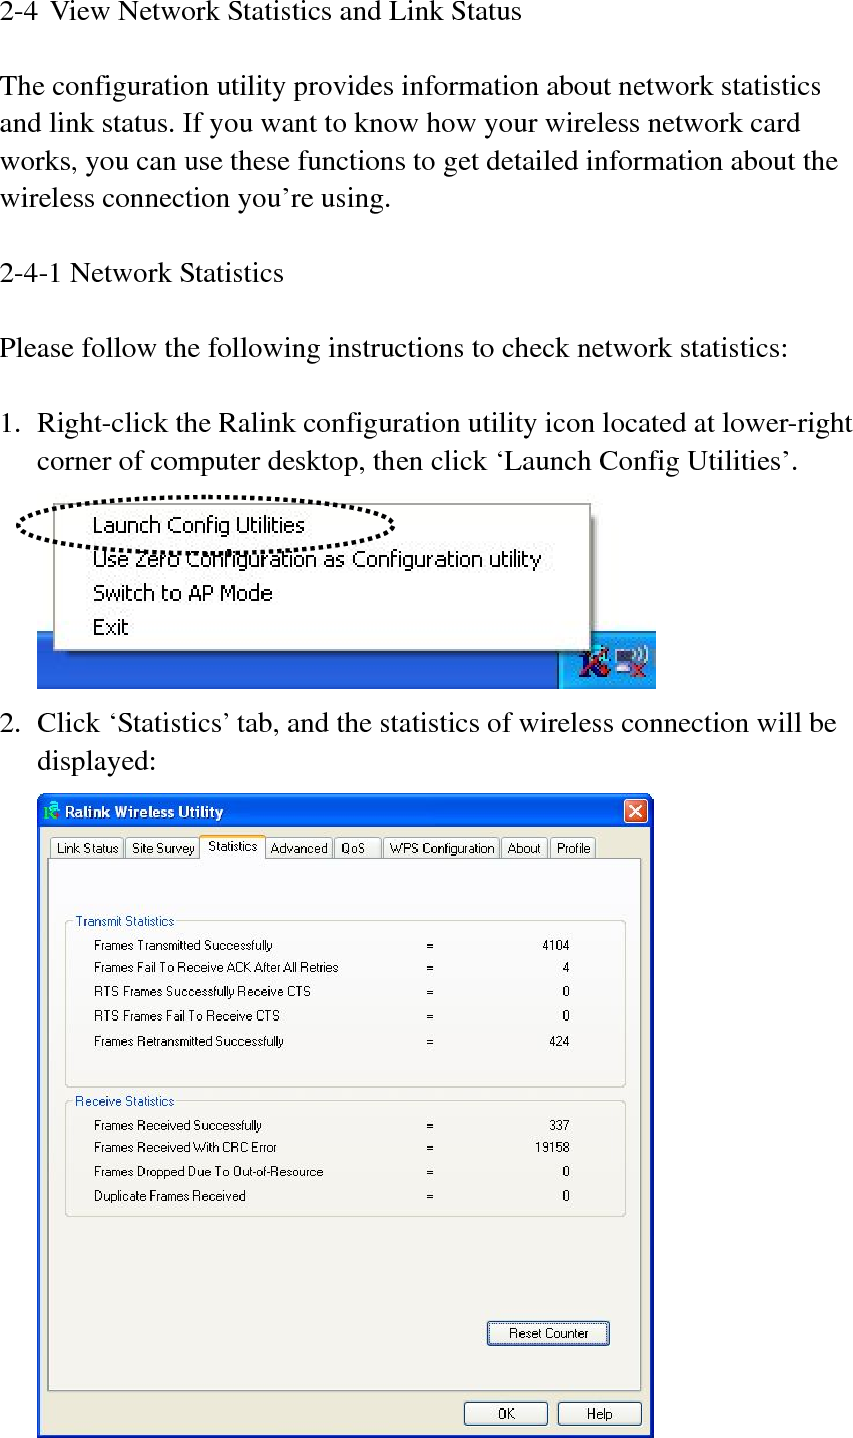 All connection-related statistics is displayed here. You can click ‘Reset Counter’ to reset the statistics of all items back to 0.  Click ‘OK’ to close the window. 